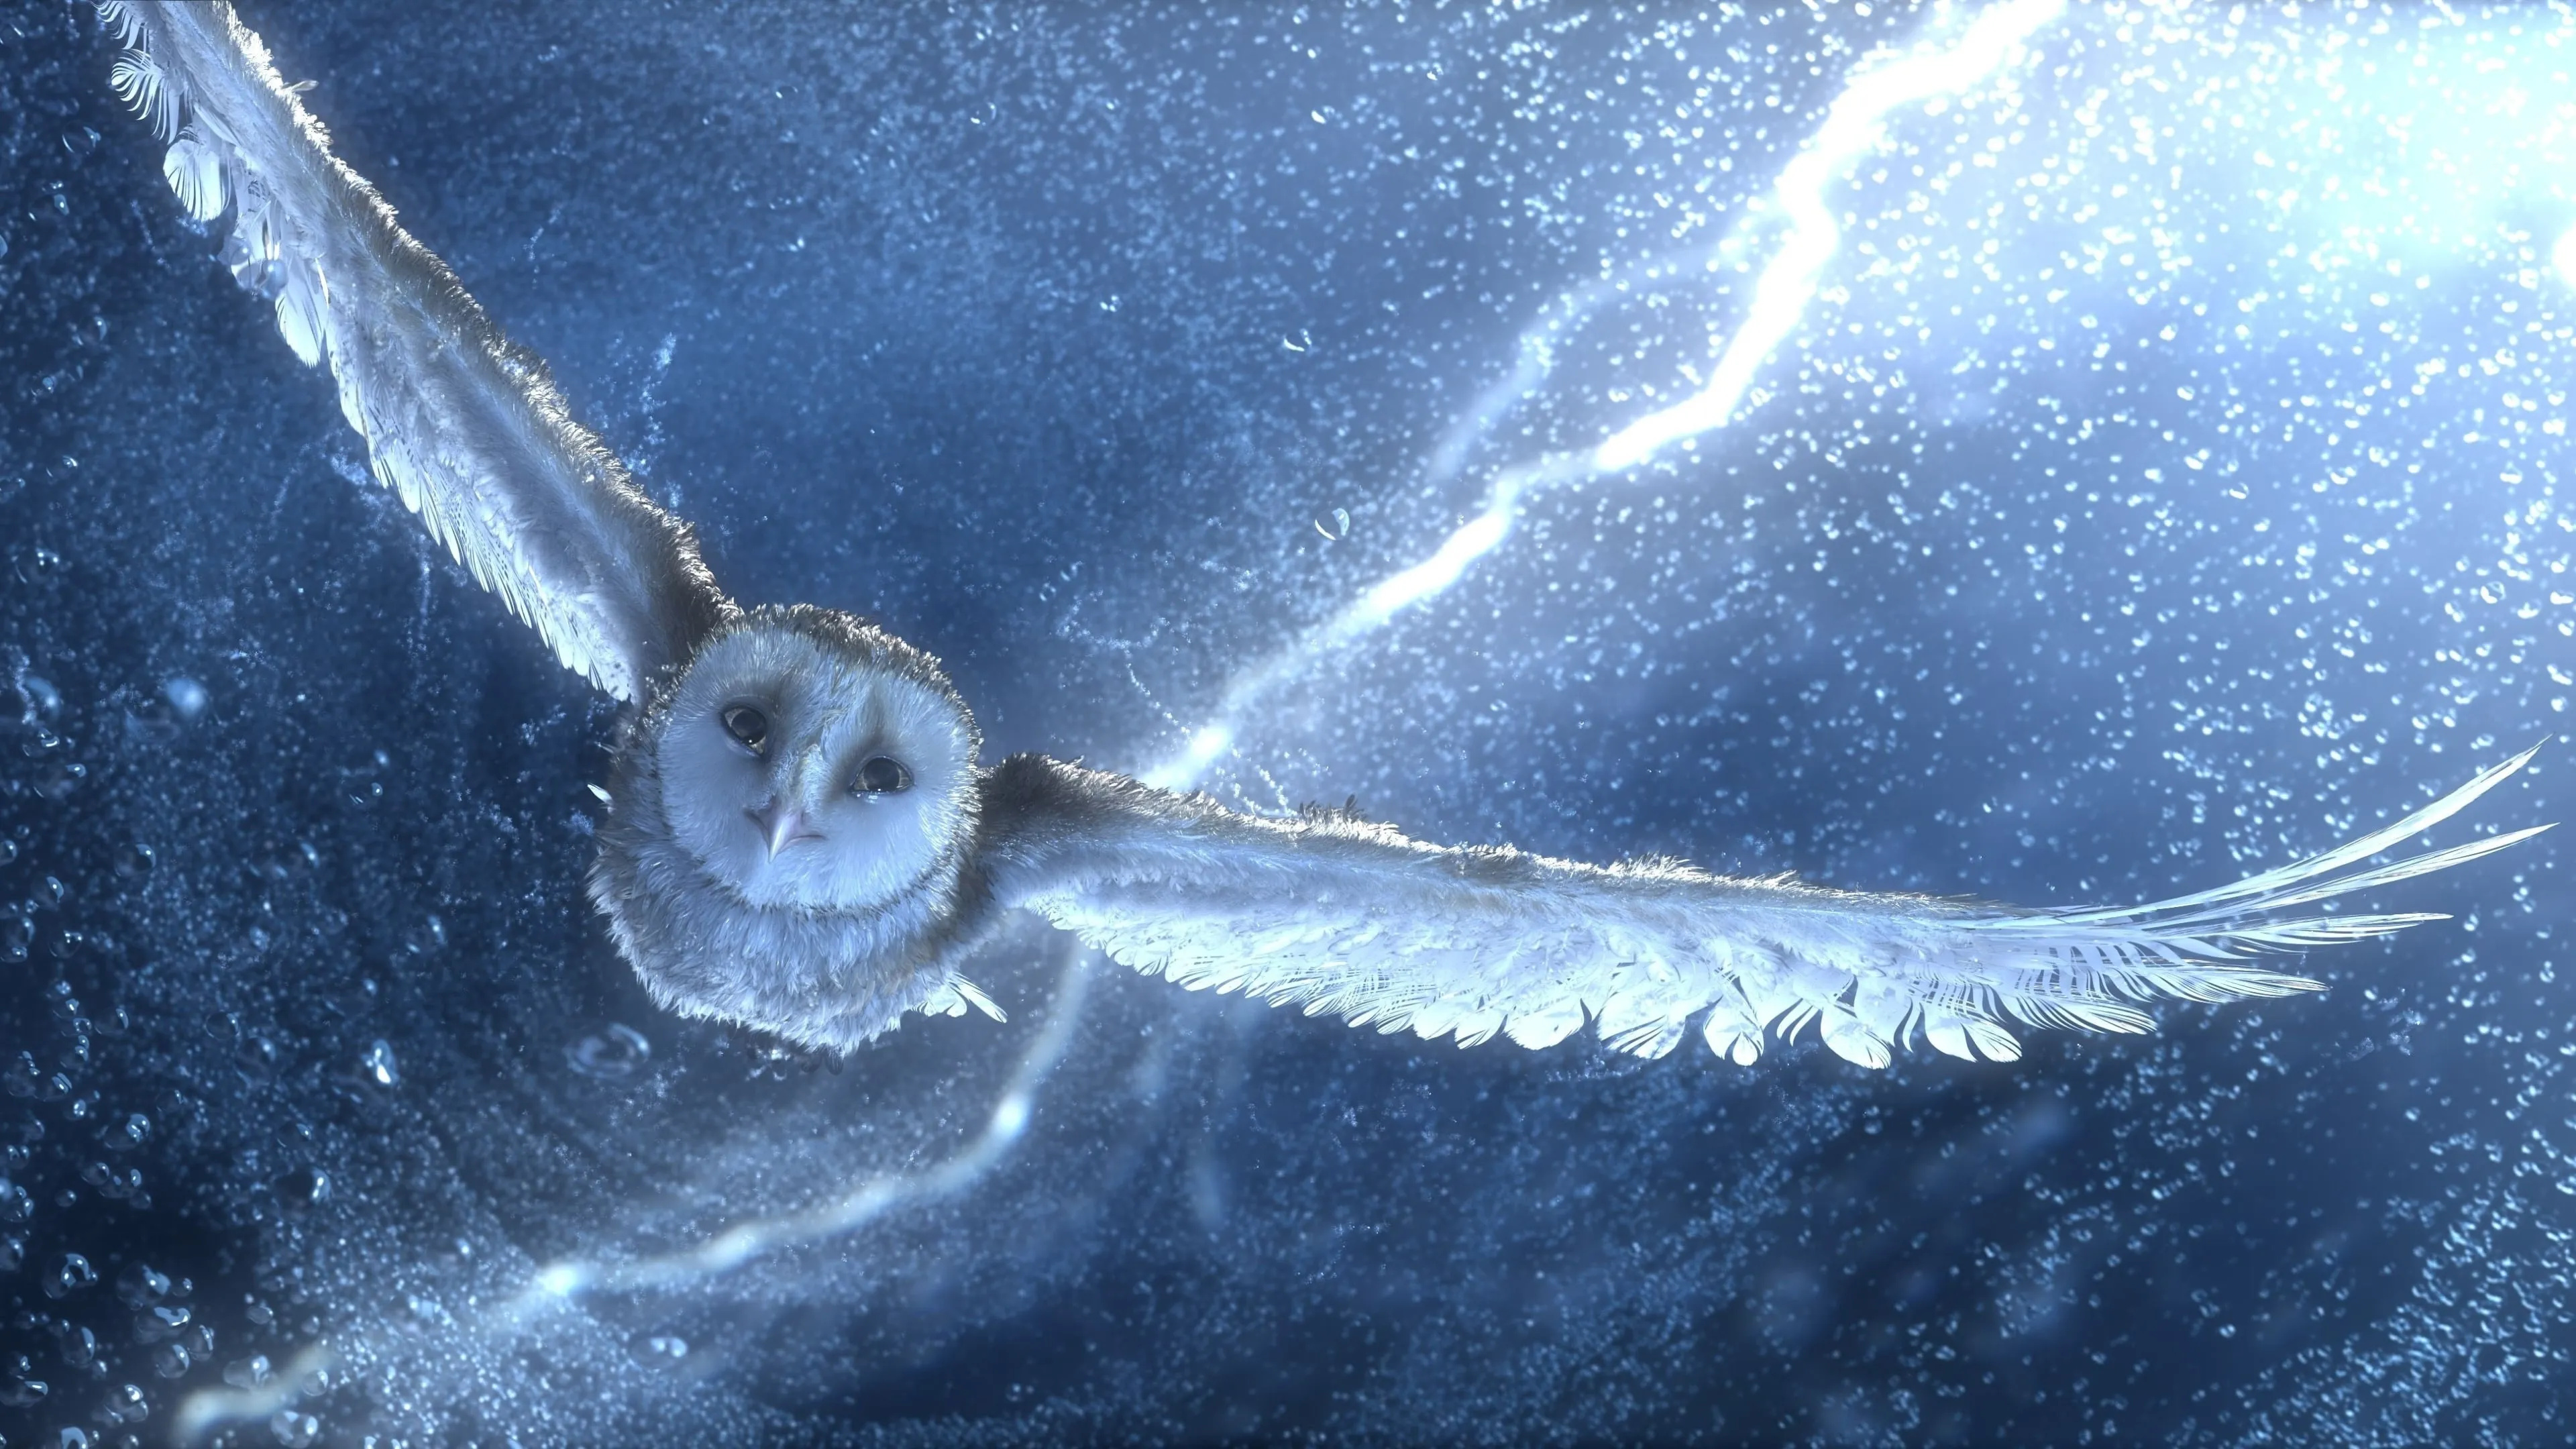 Legend of the Guardians: The Owls of Ga'Hoole, Engrossing movie, Epic journey, Family film, 3840x2160 4K Desktop